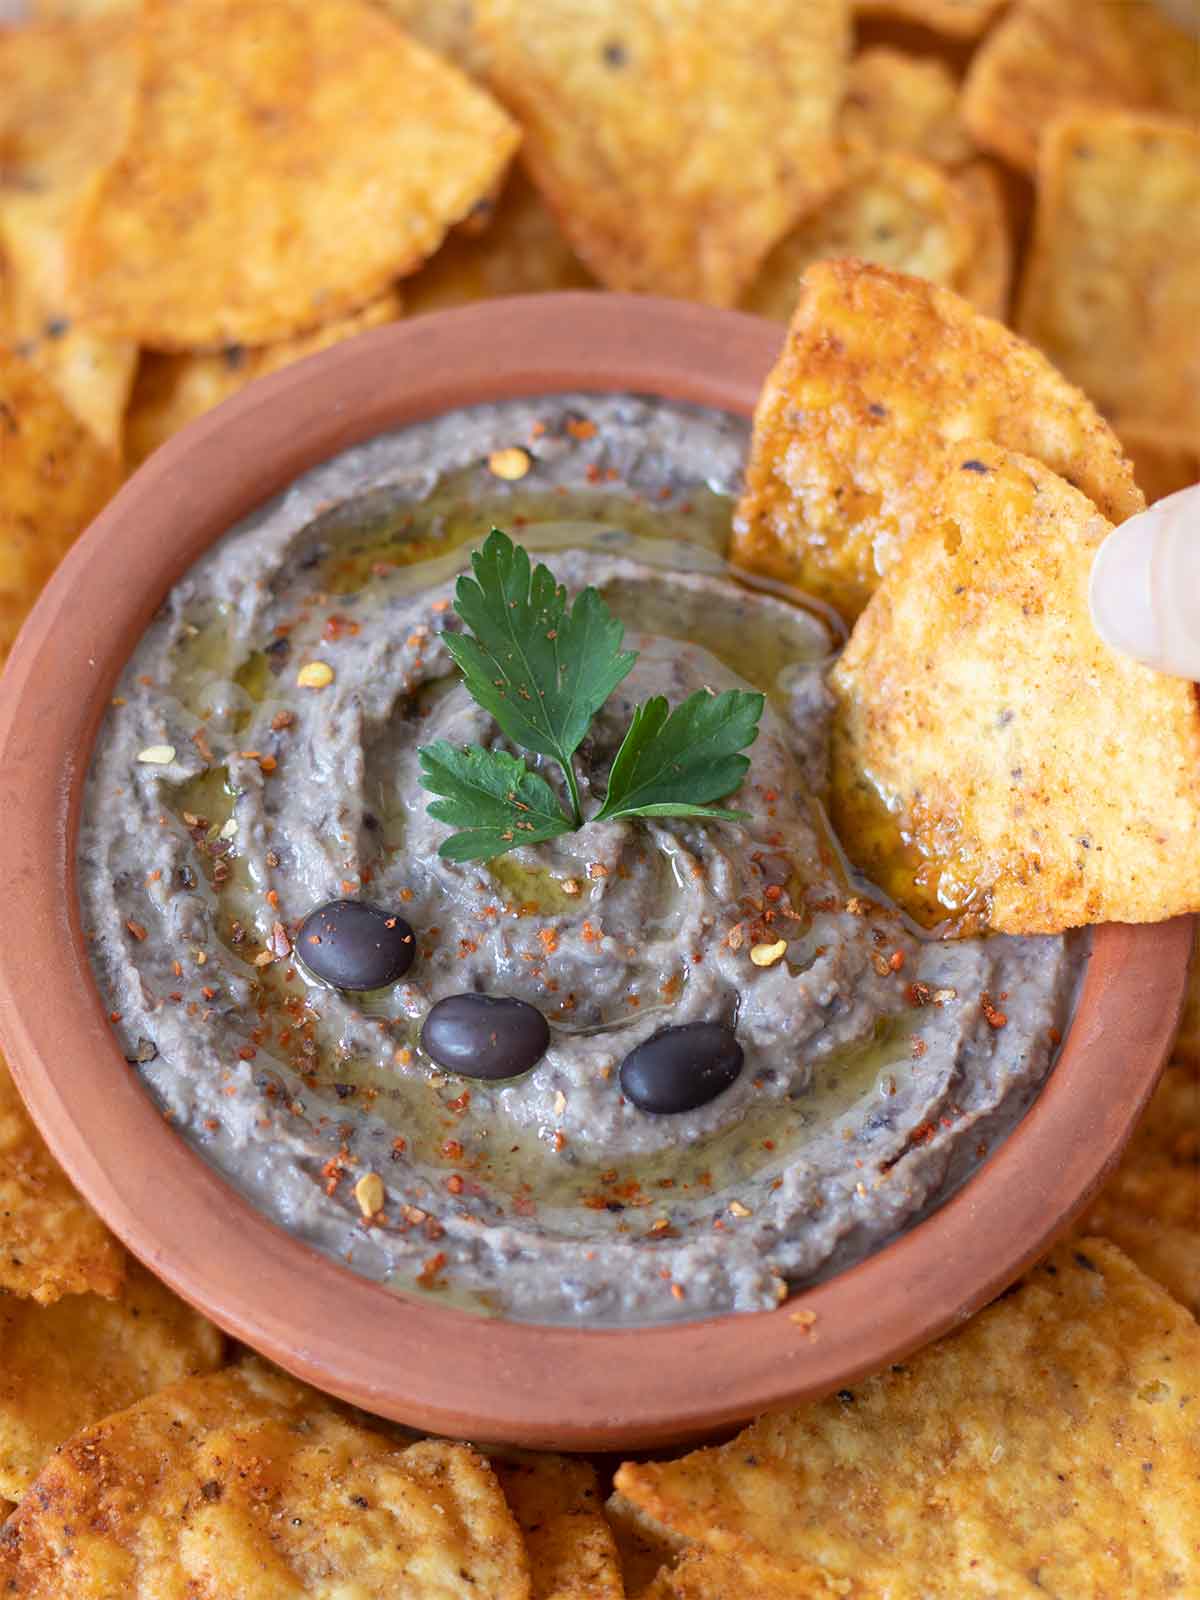 Creamy healthy homemade dip with corn chips